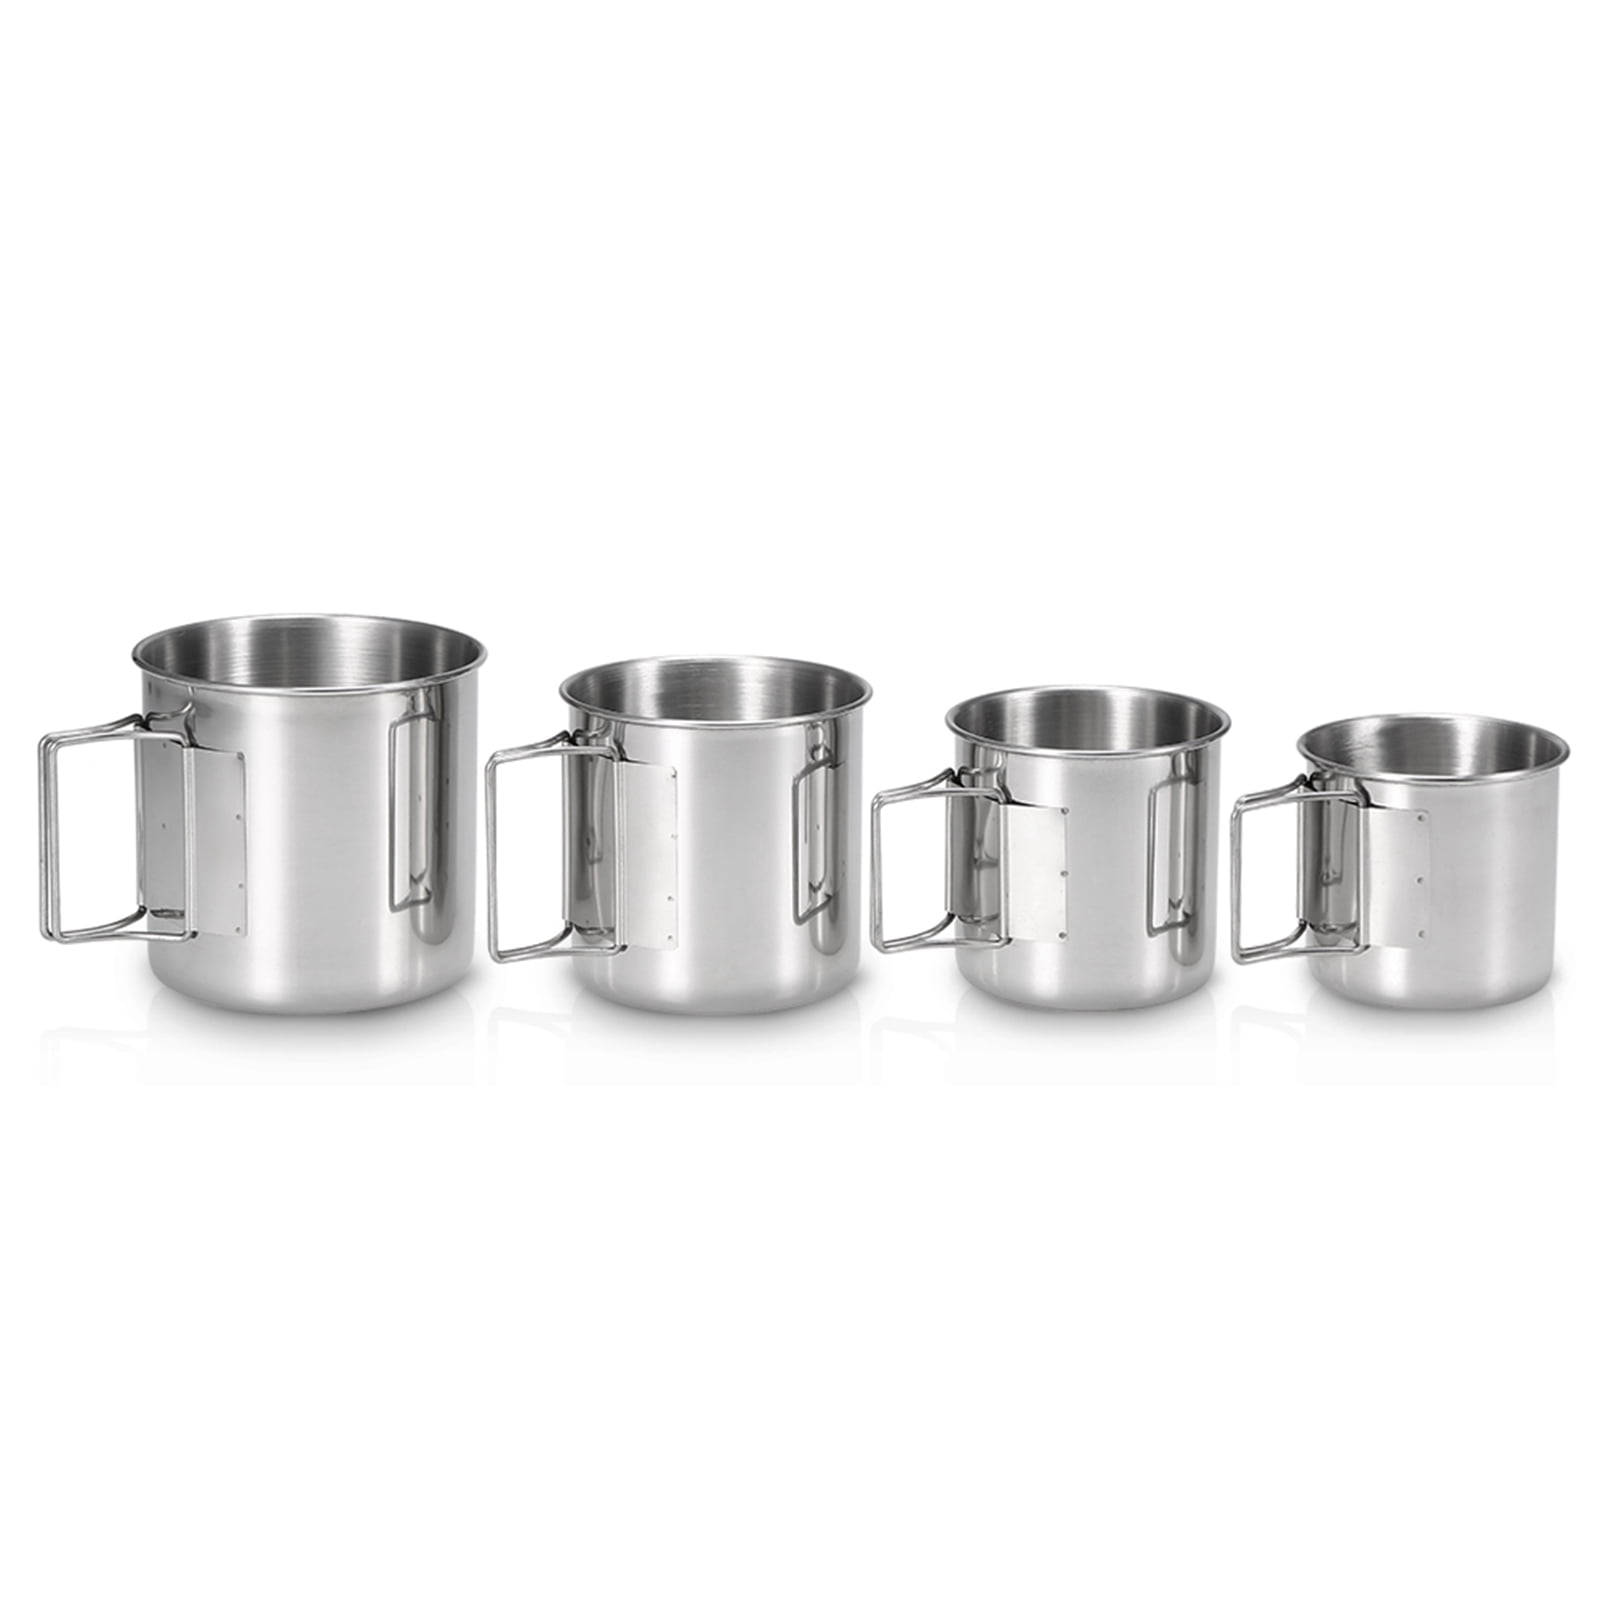 Folding Water Cup Stainless Steel together Folding Drinking Cup L/P